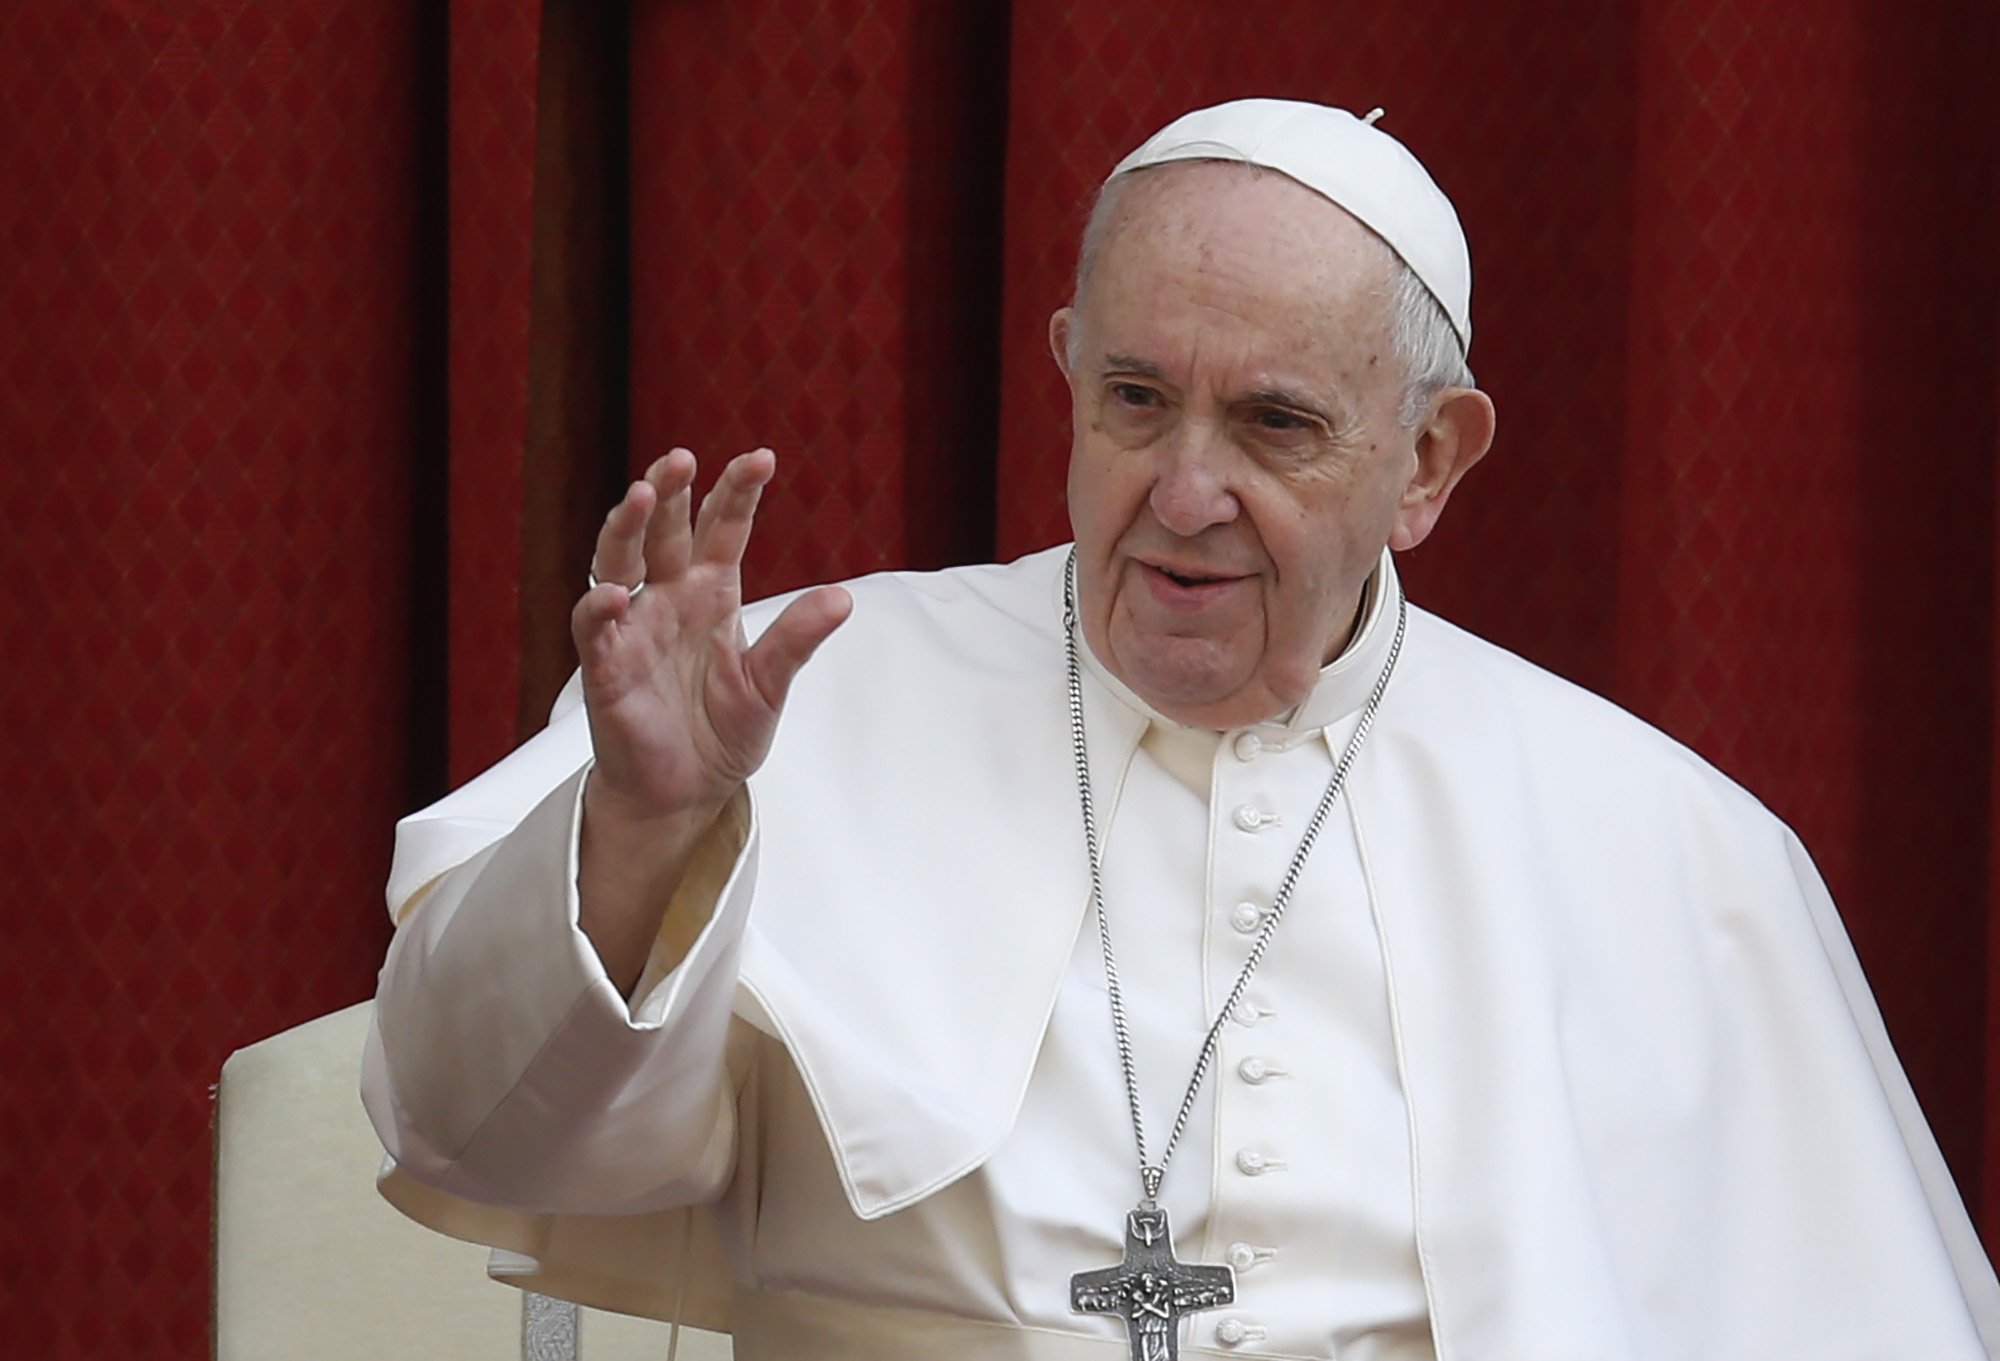 Why did Pope Francis Get Hospitalized? Here’s his Latest Health Update